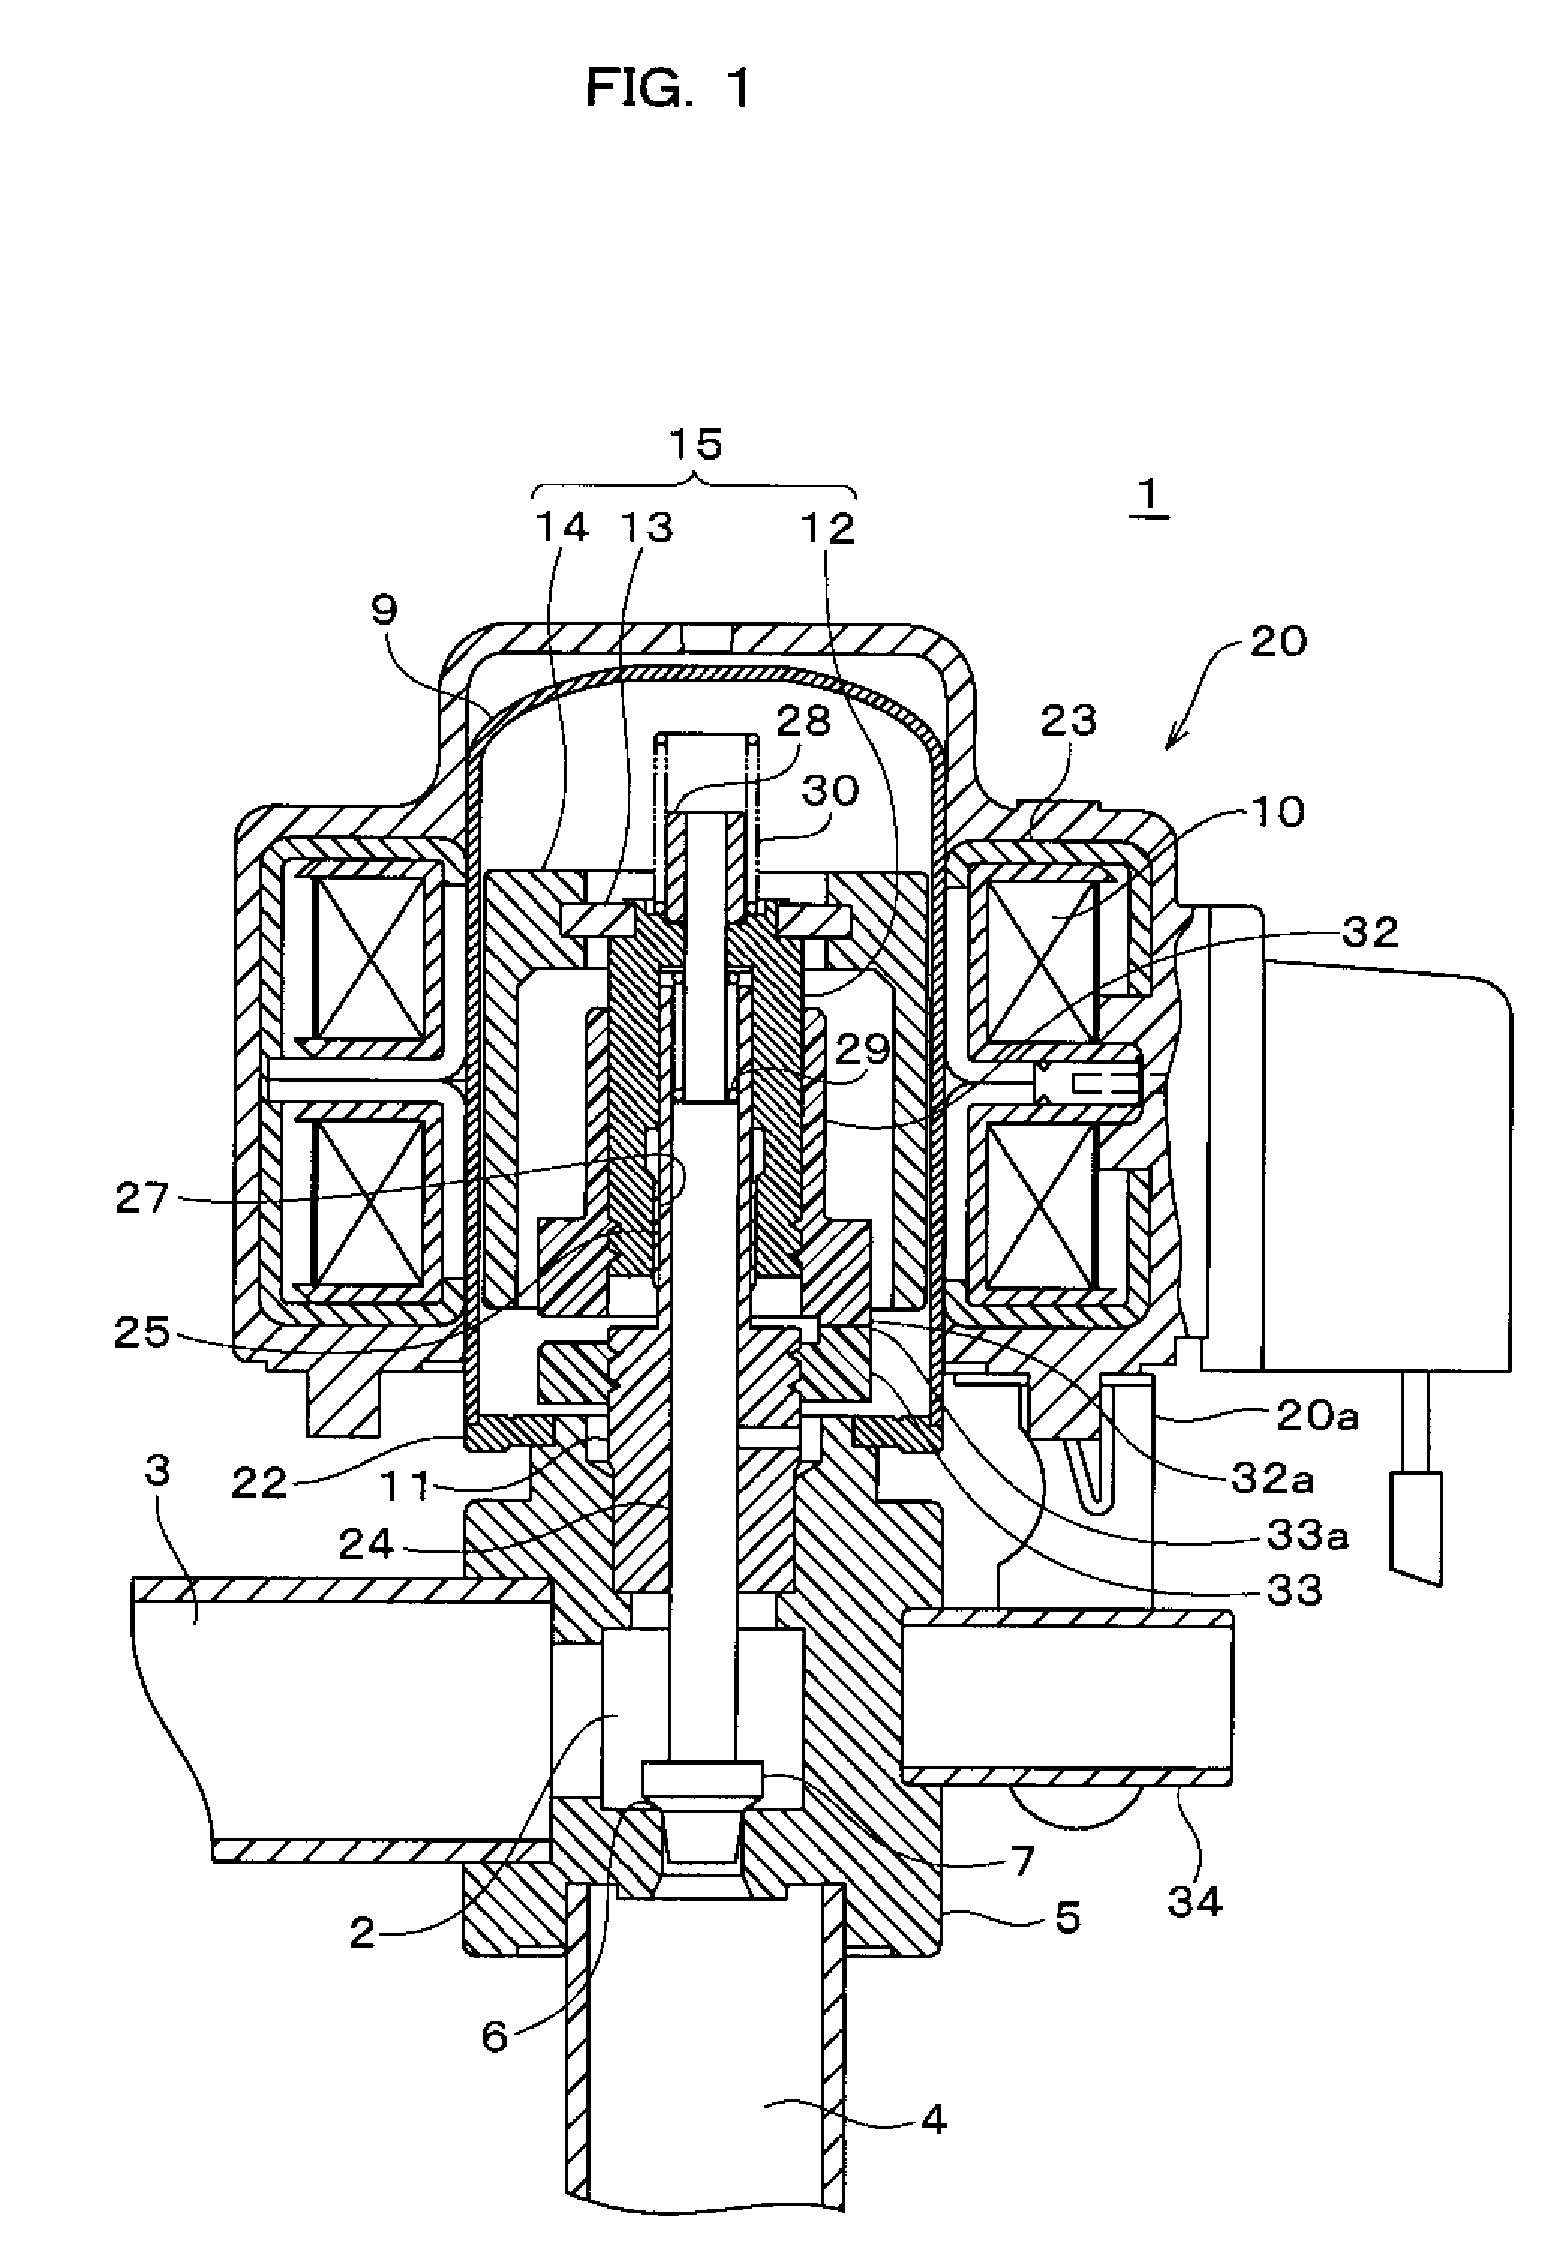 Motor driven valve and cooling/heating system